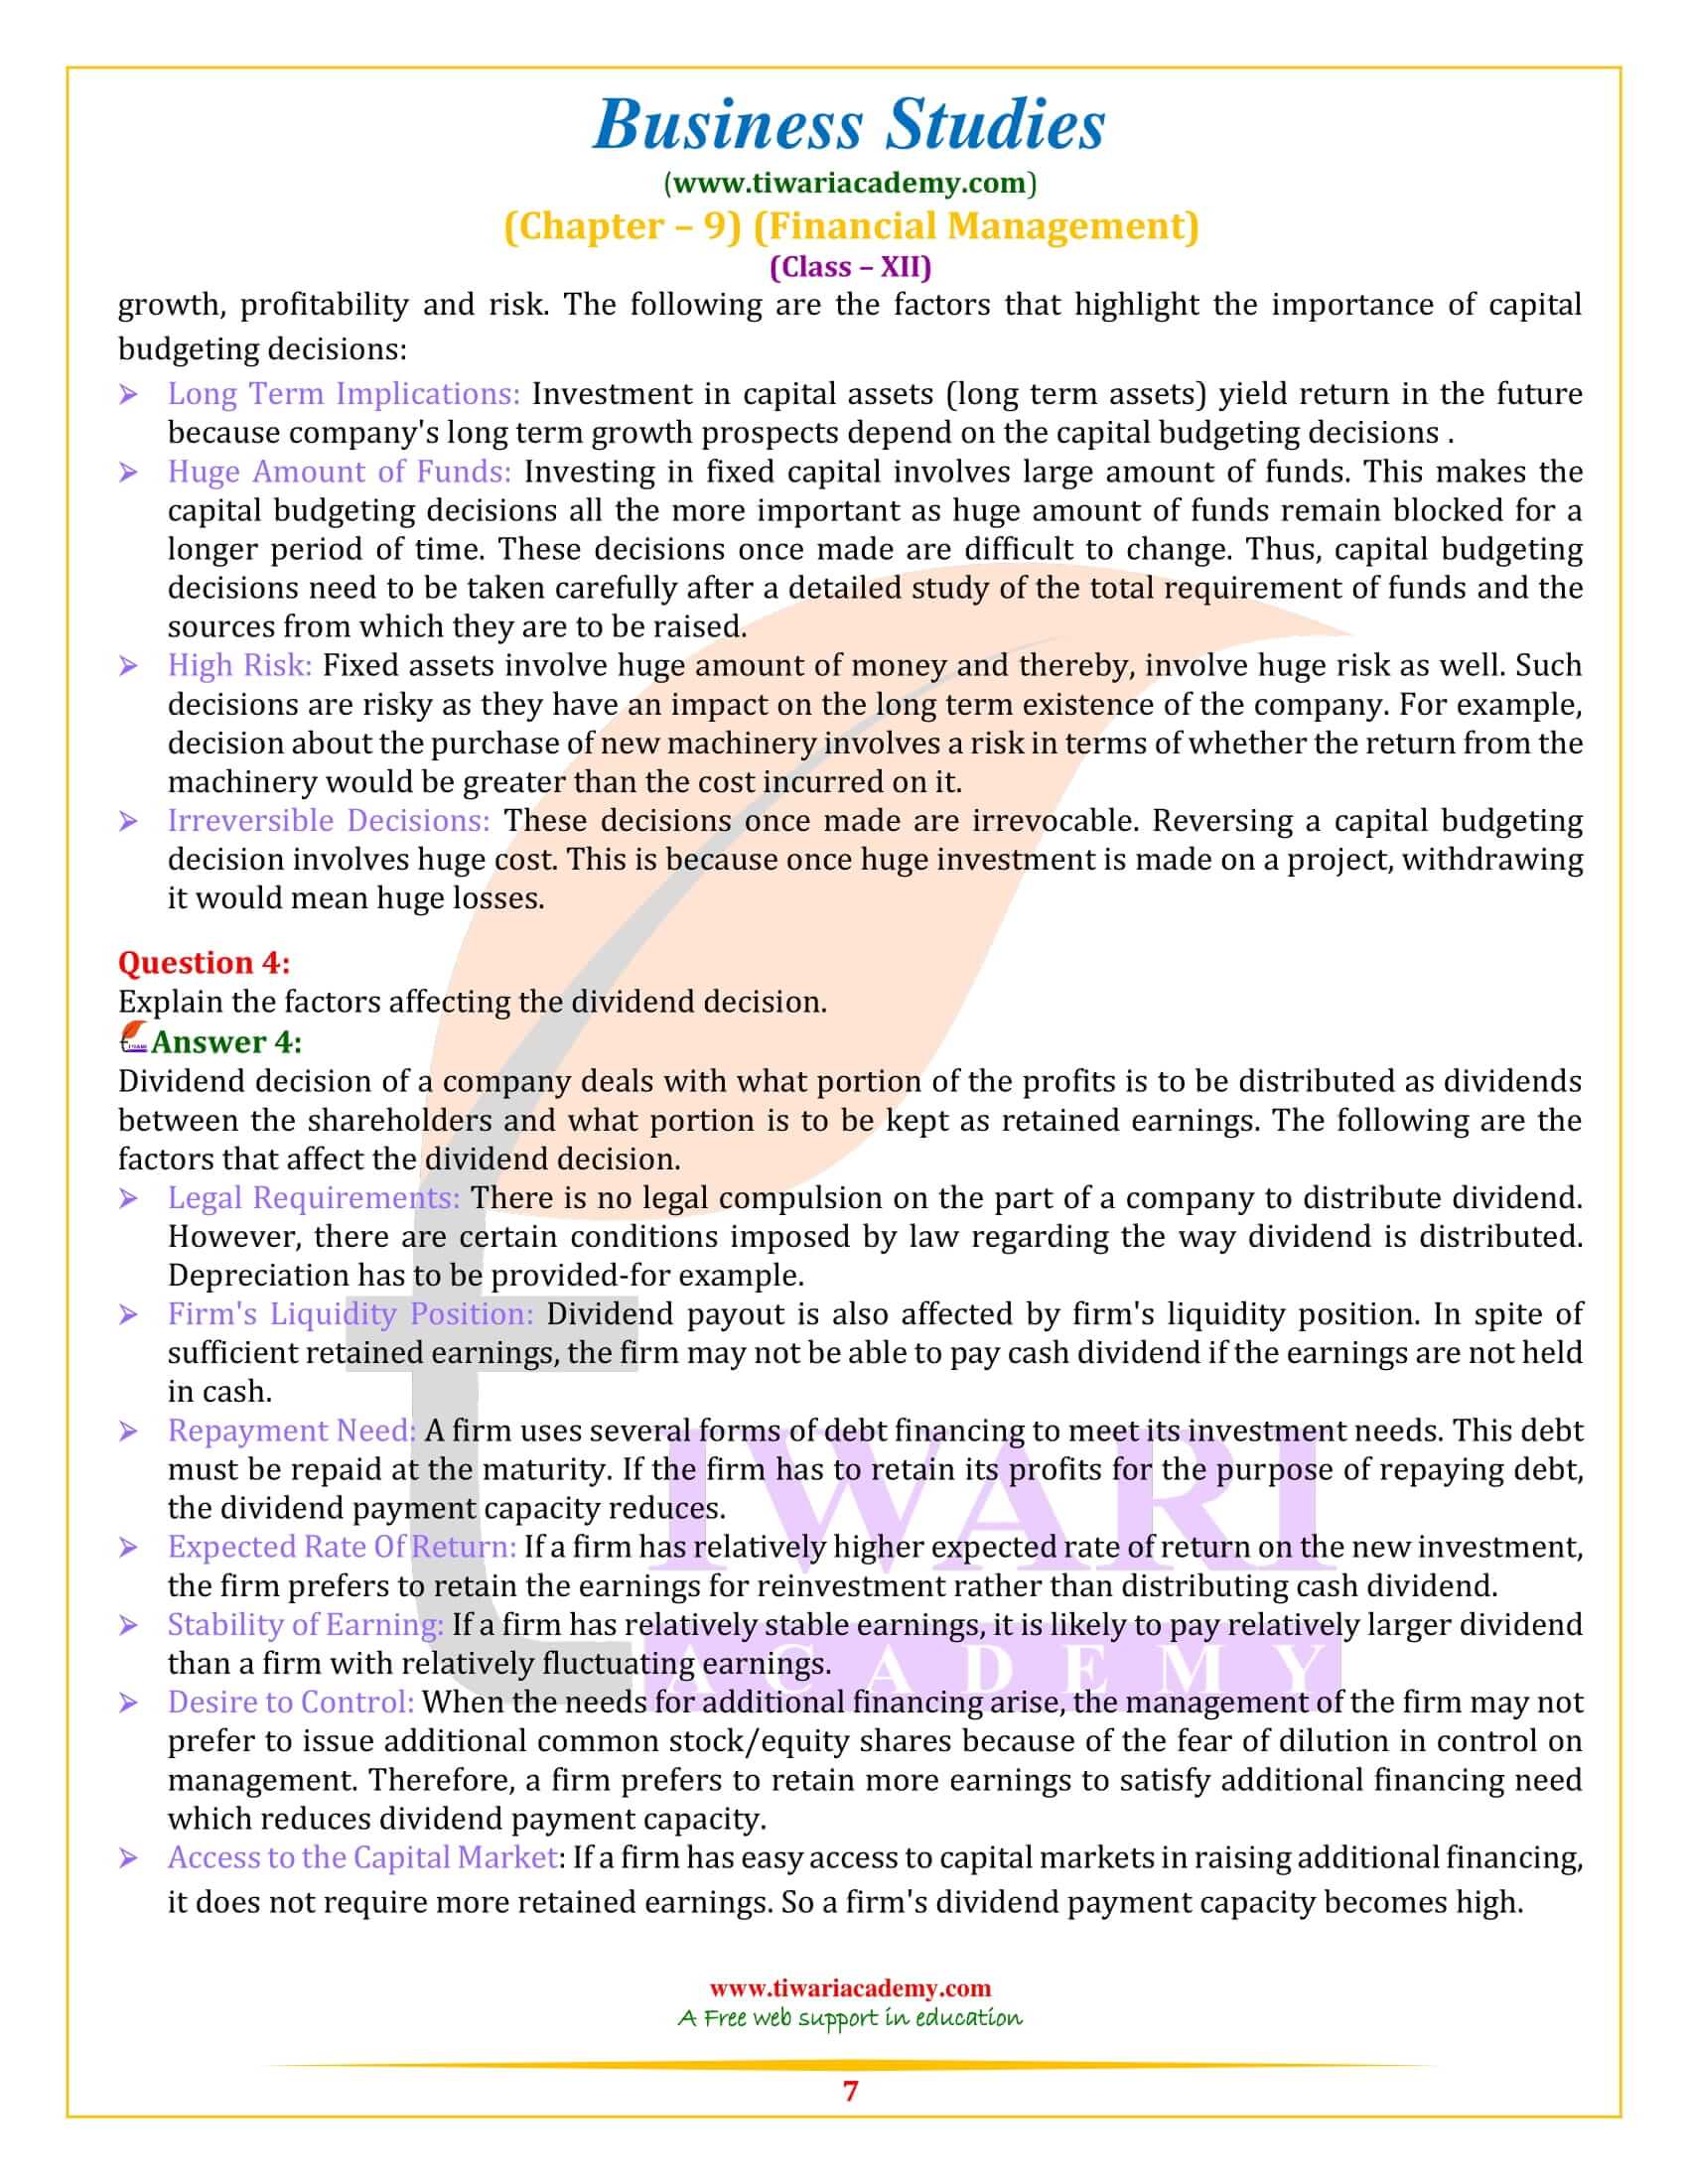 NCERT Solutions for Class 12 Business Studies Chapter 9 free download